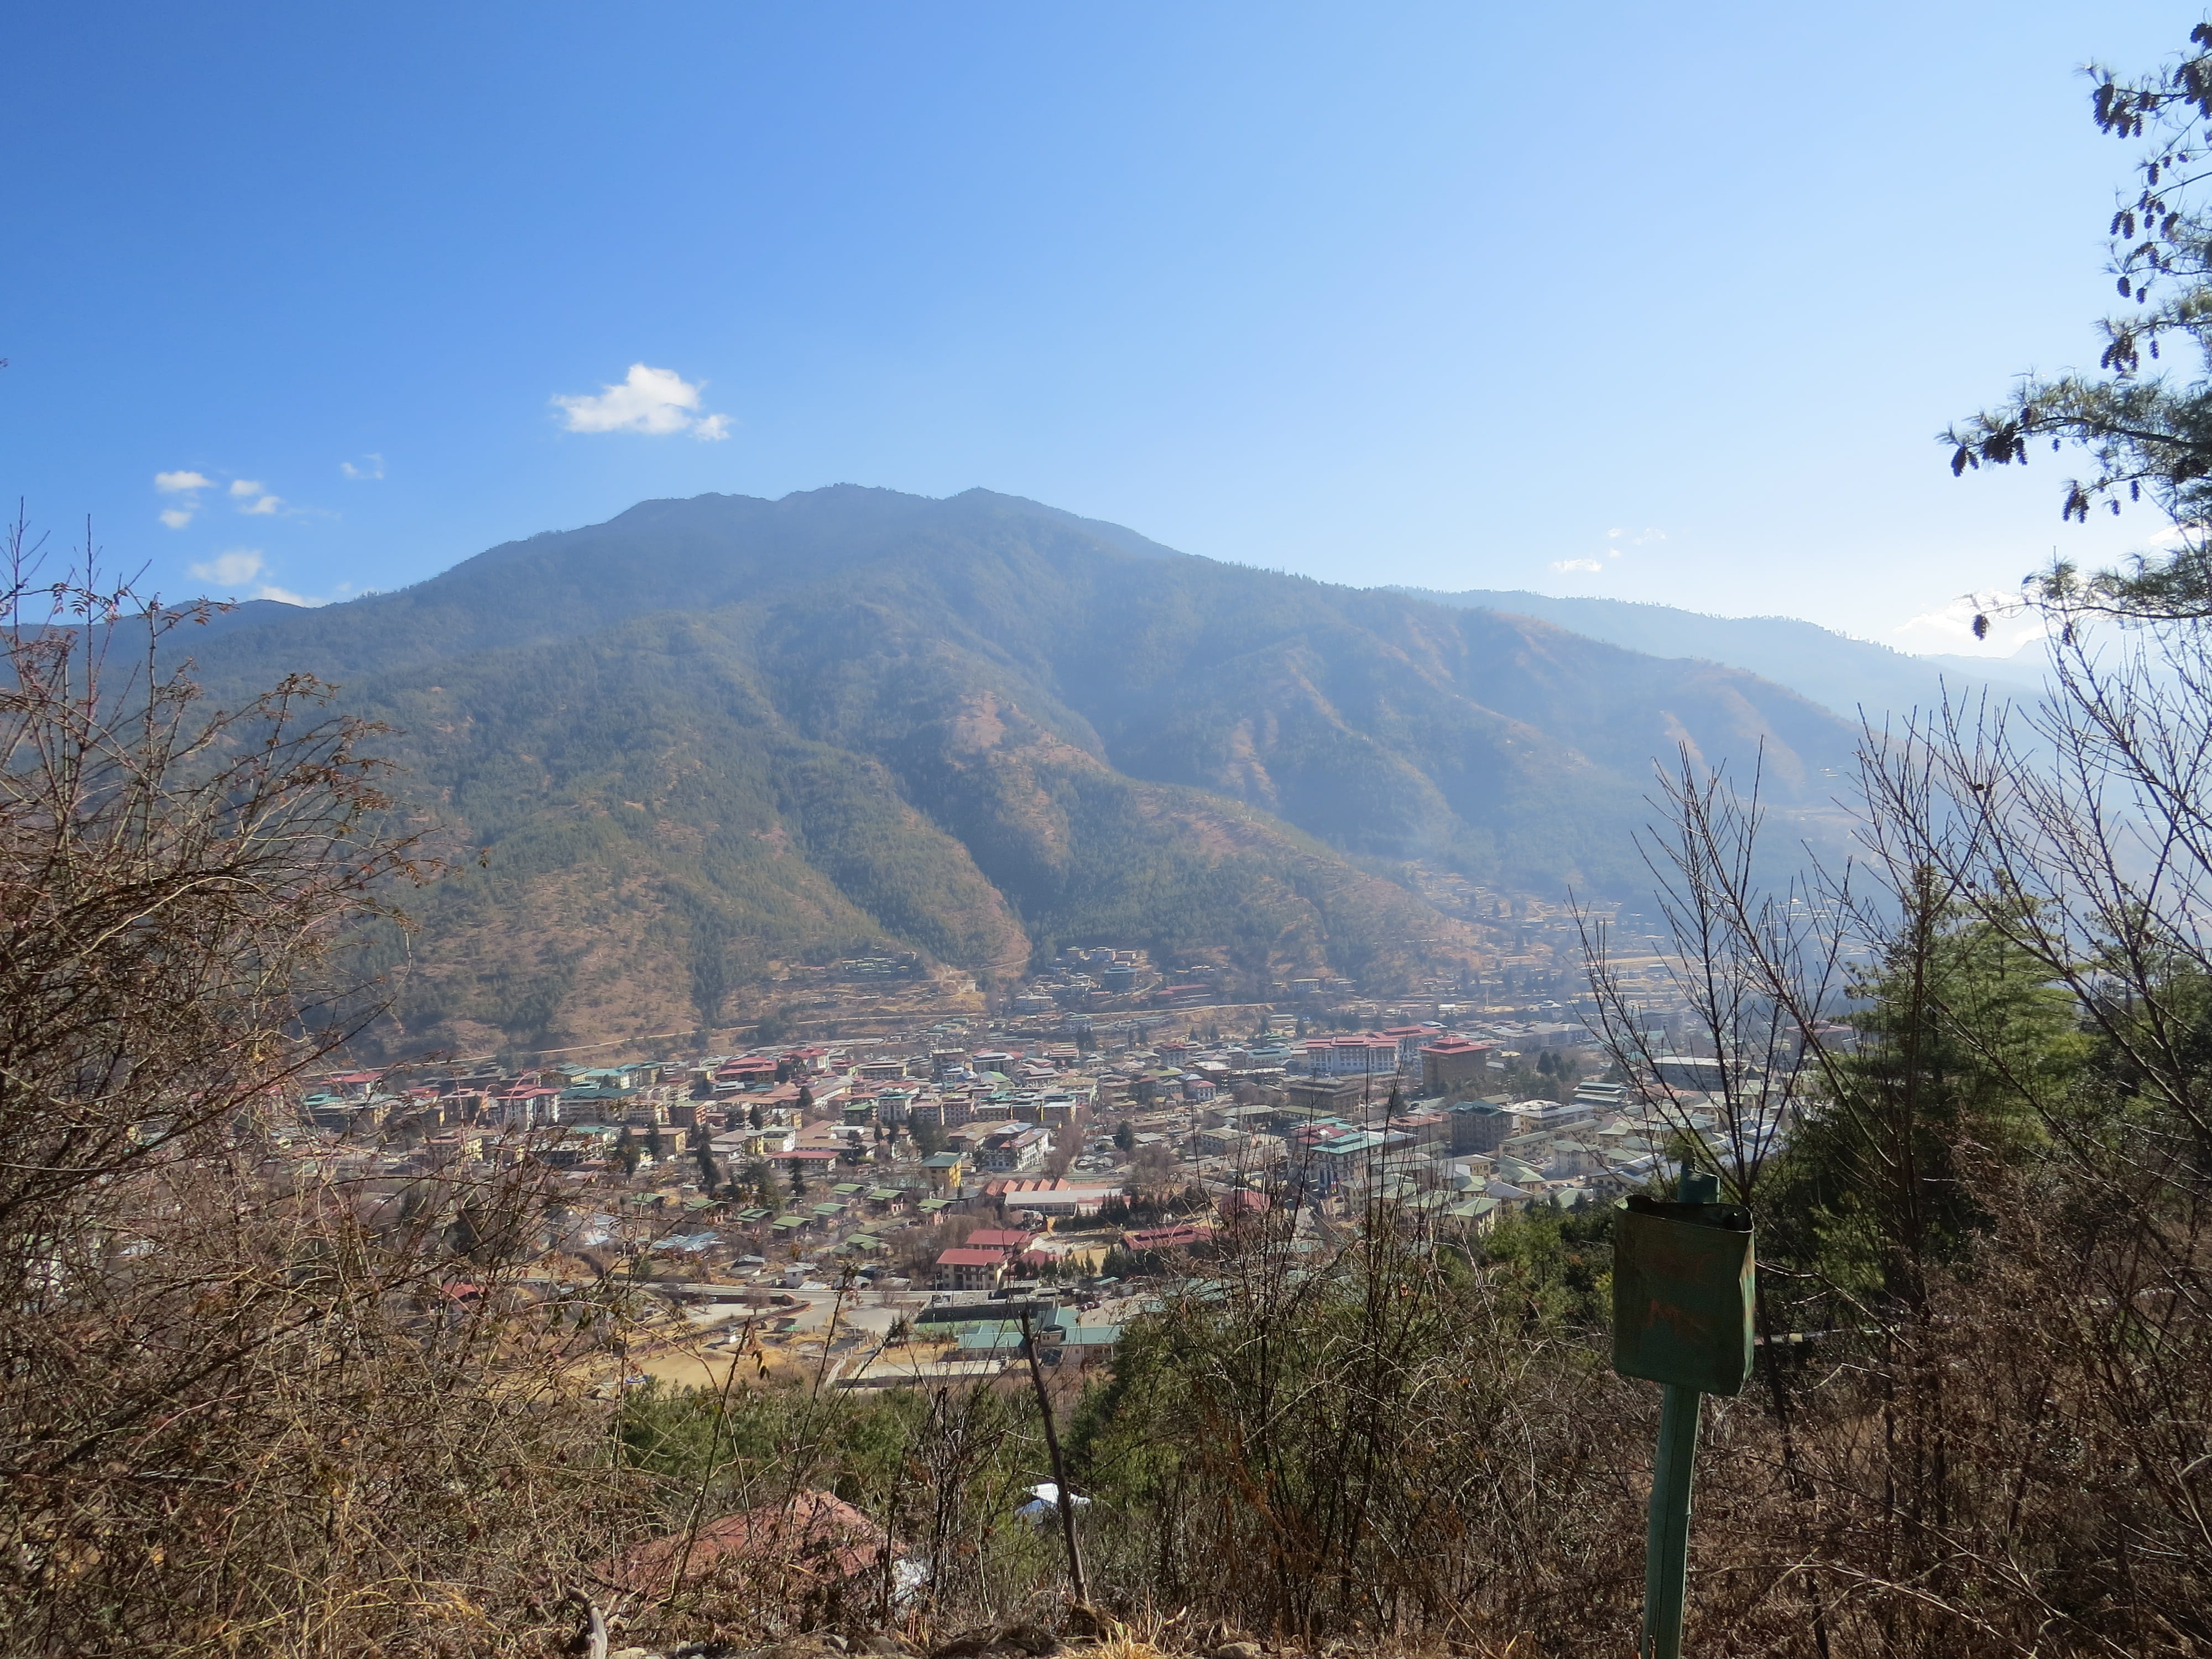 View of Thimphu, Bhutan's capital, from above with mountains and blue sky in background